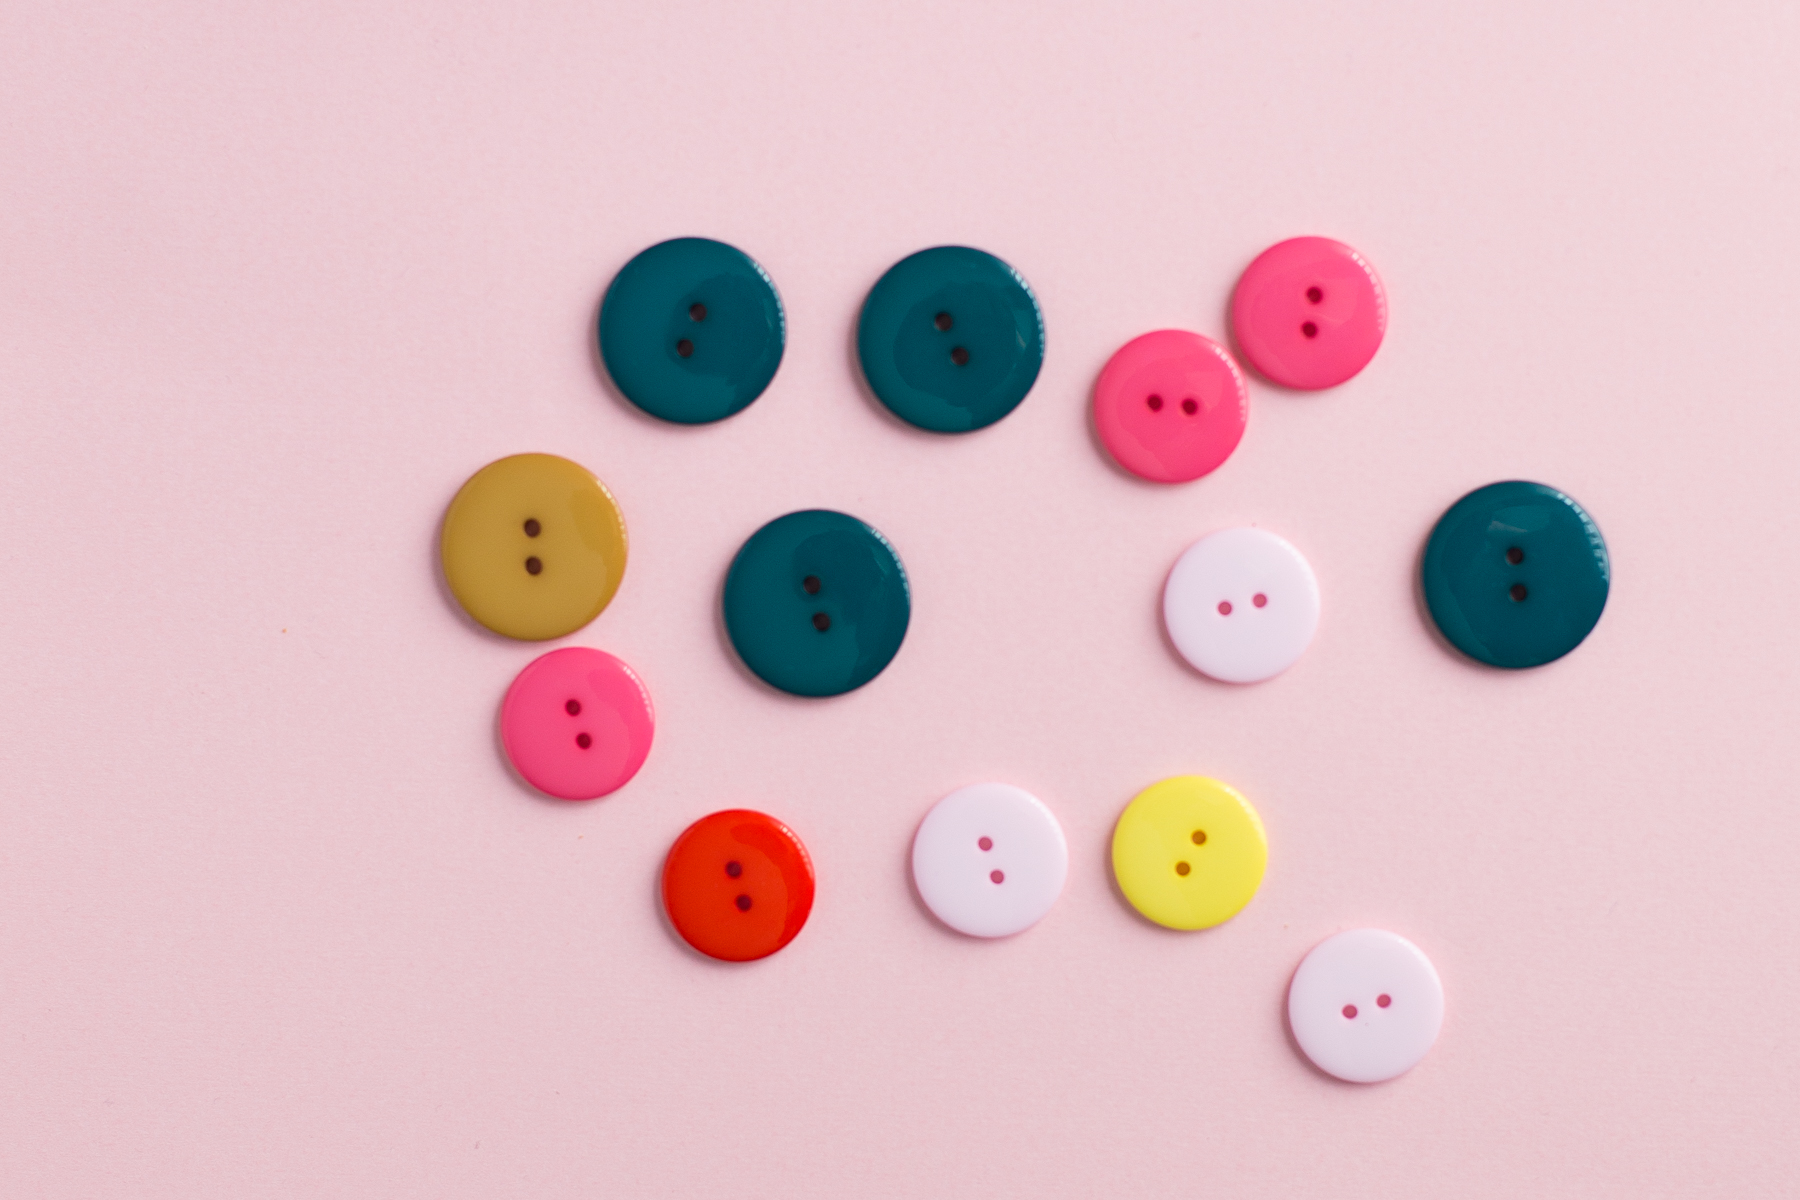 plastic buttons round knitting - Pink plastic button | Medium | 23 mm | Round plastic button - 28/03/2018